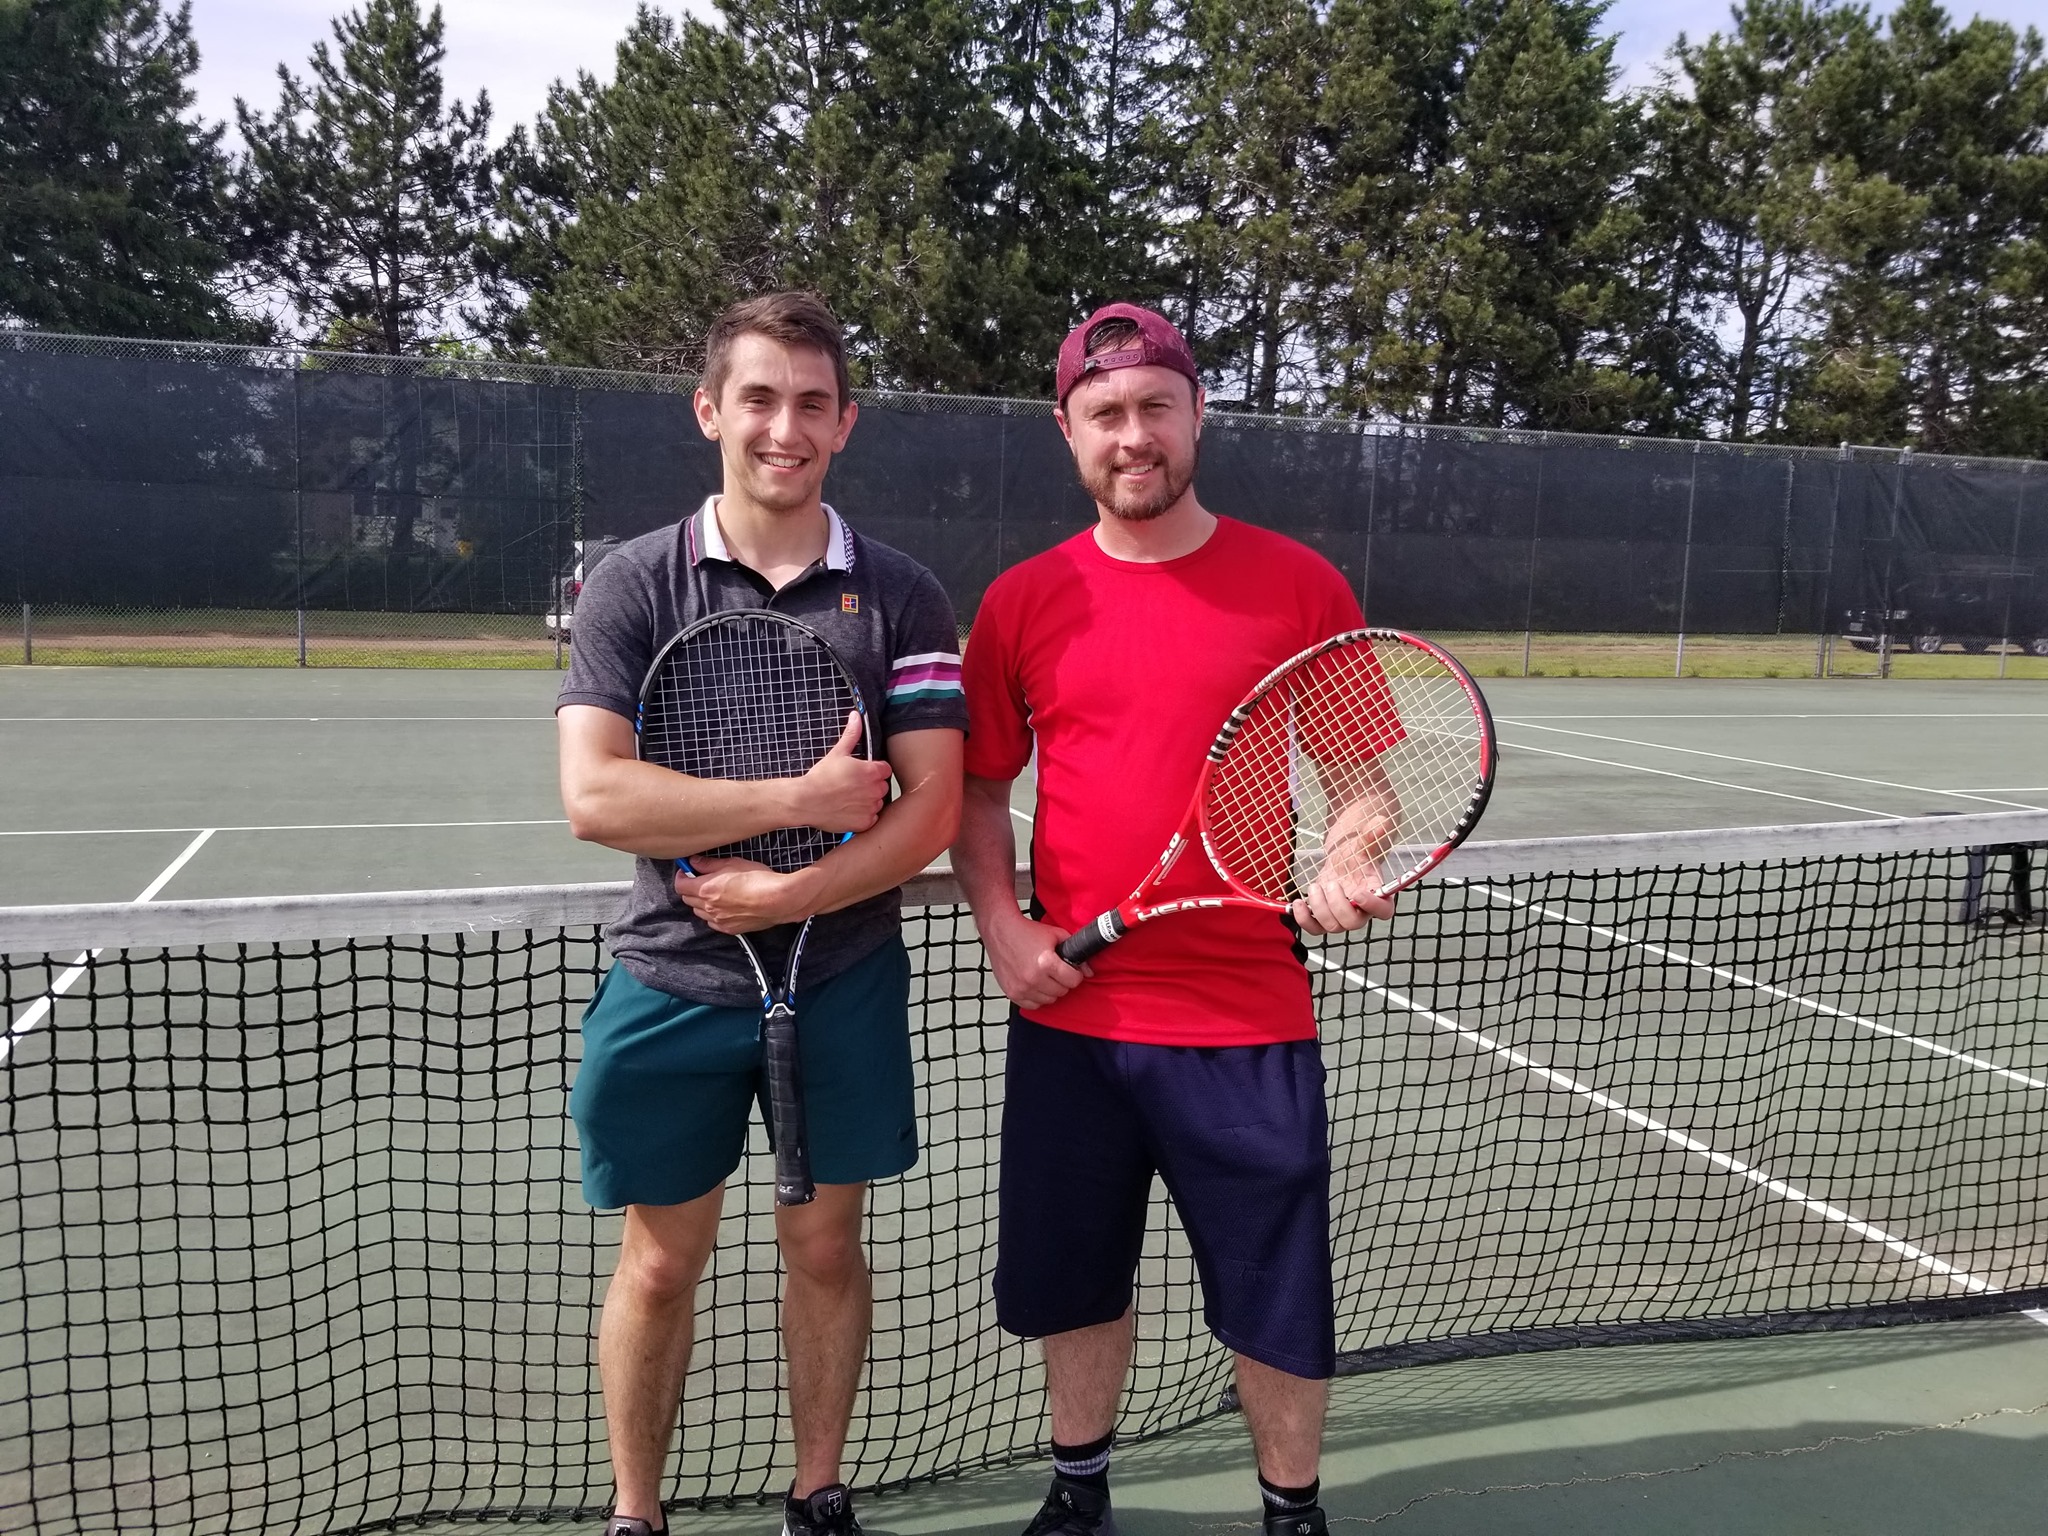 Photo of 2 men holding tennis requests with tennis court in background